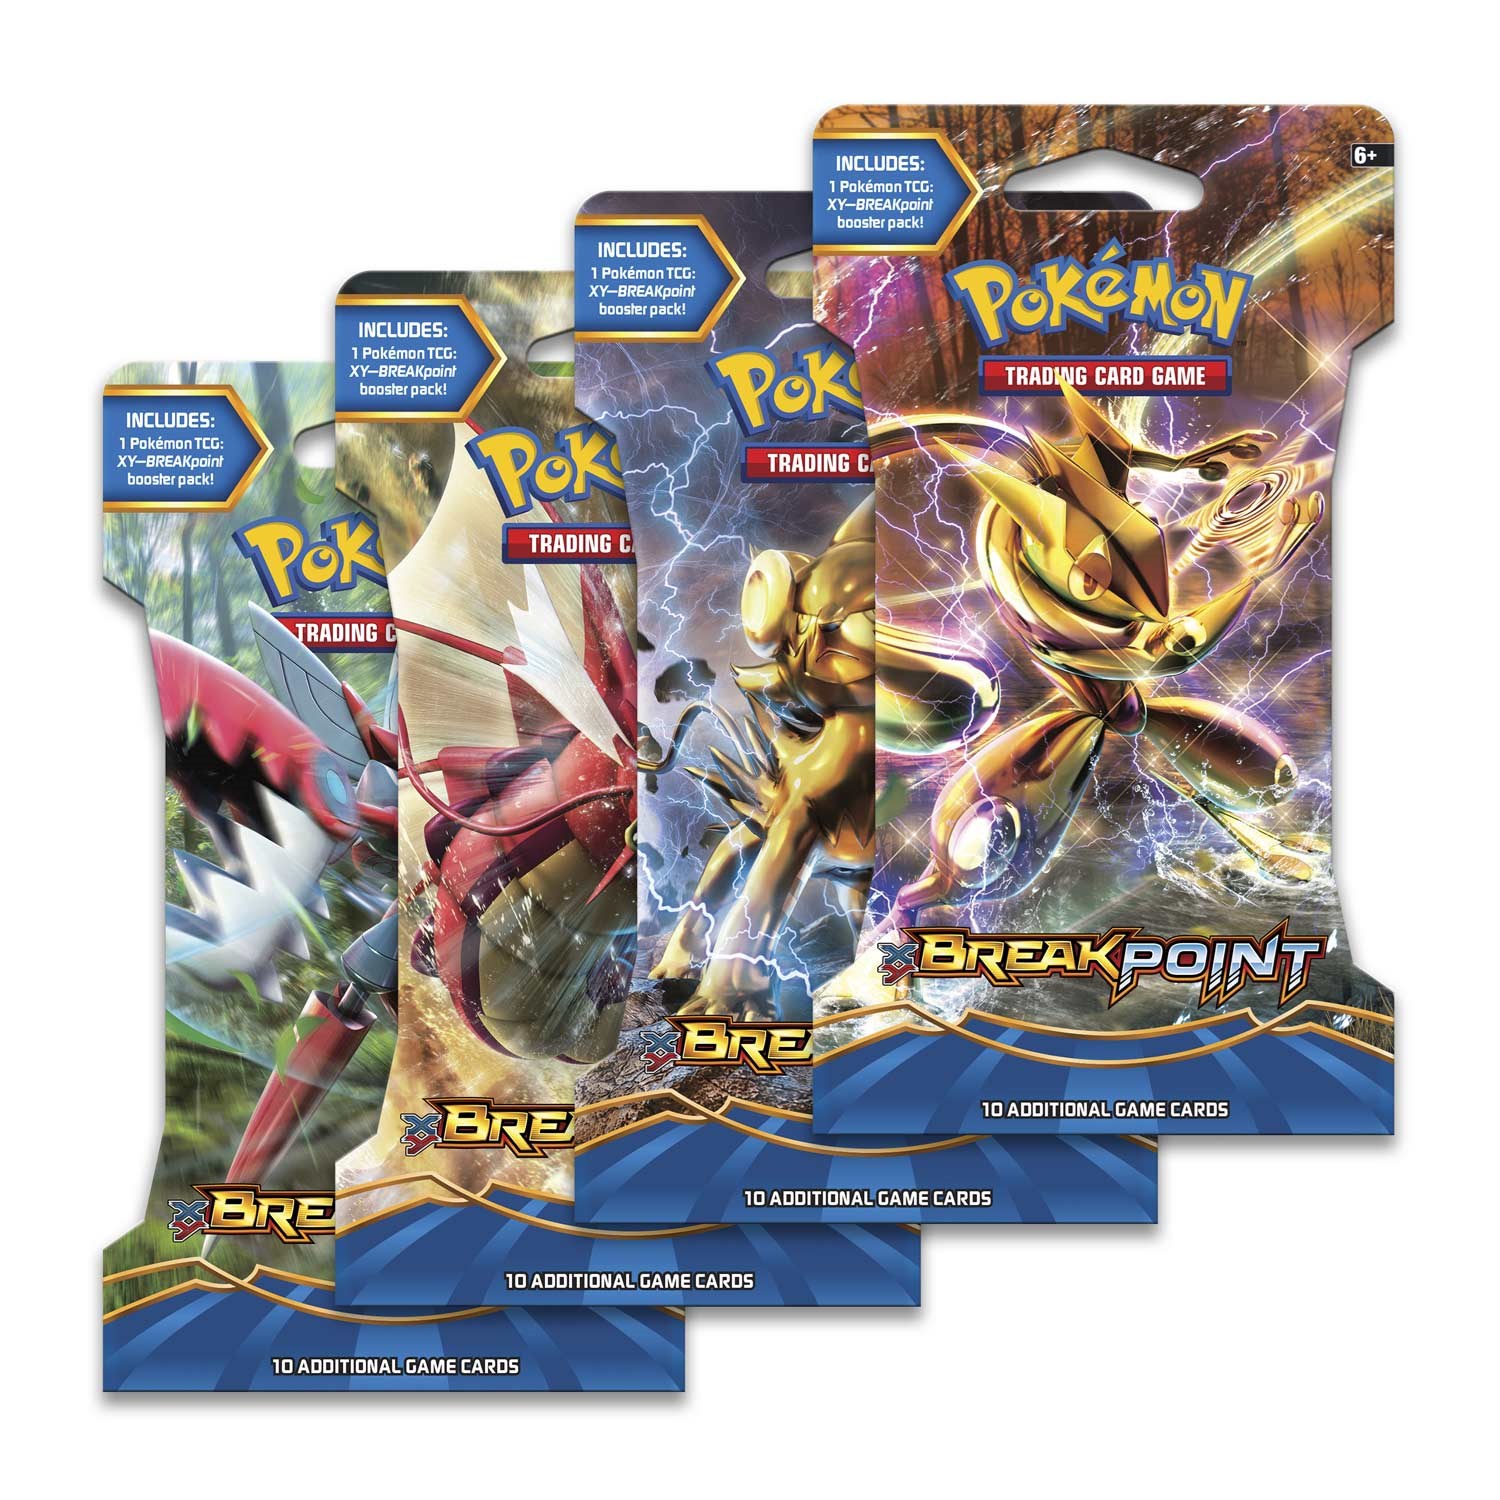 4x 10 card booster packs All 4 cover arts-FACTORY SEALED Pokemon XY BREAKPOINT 